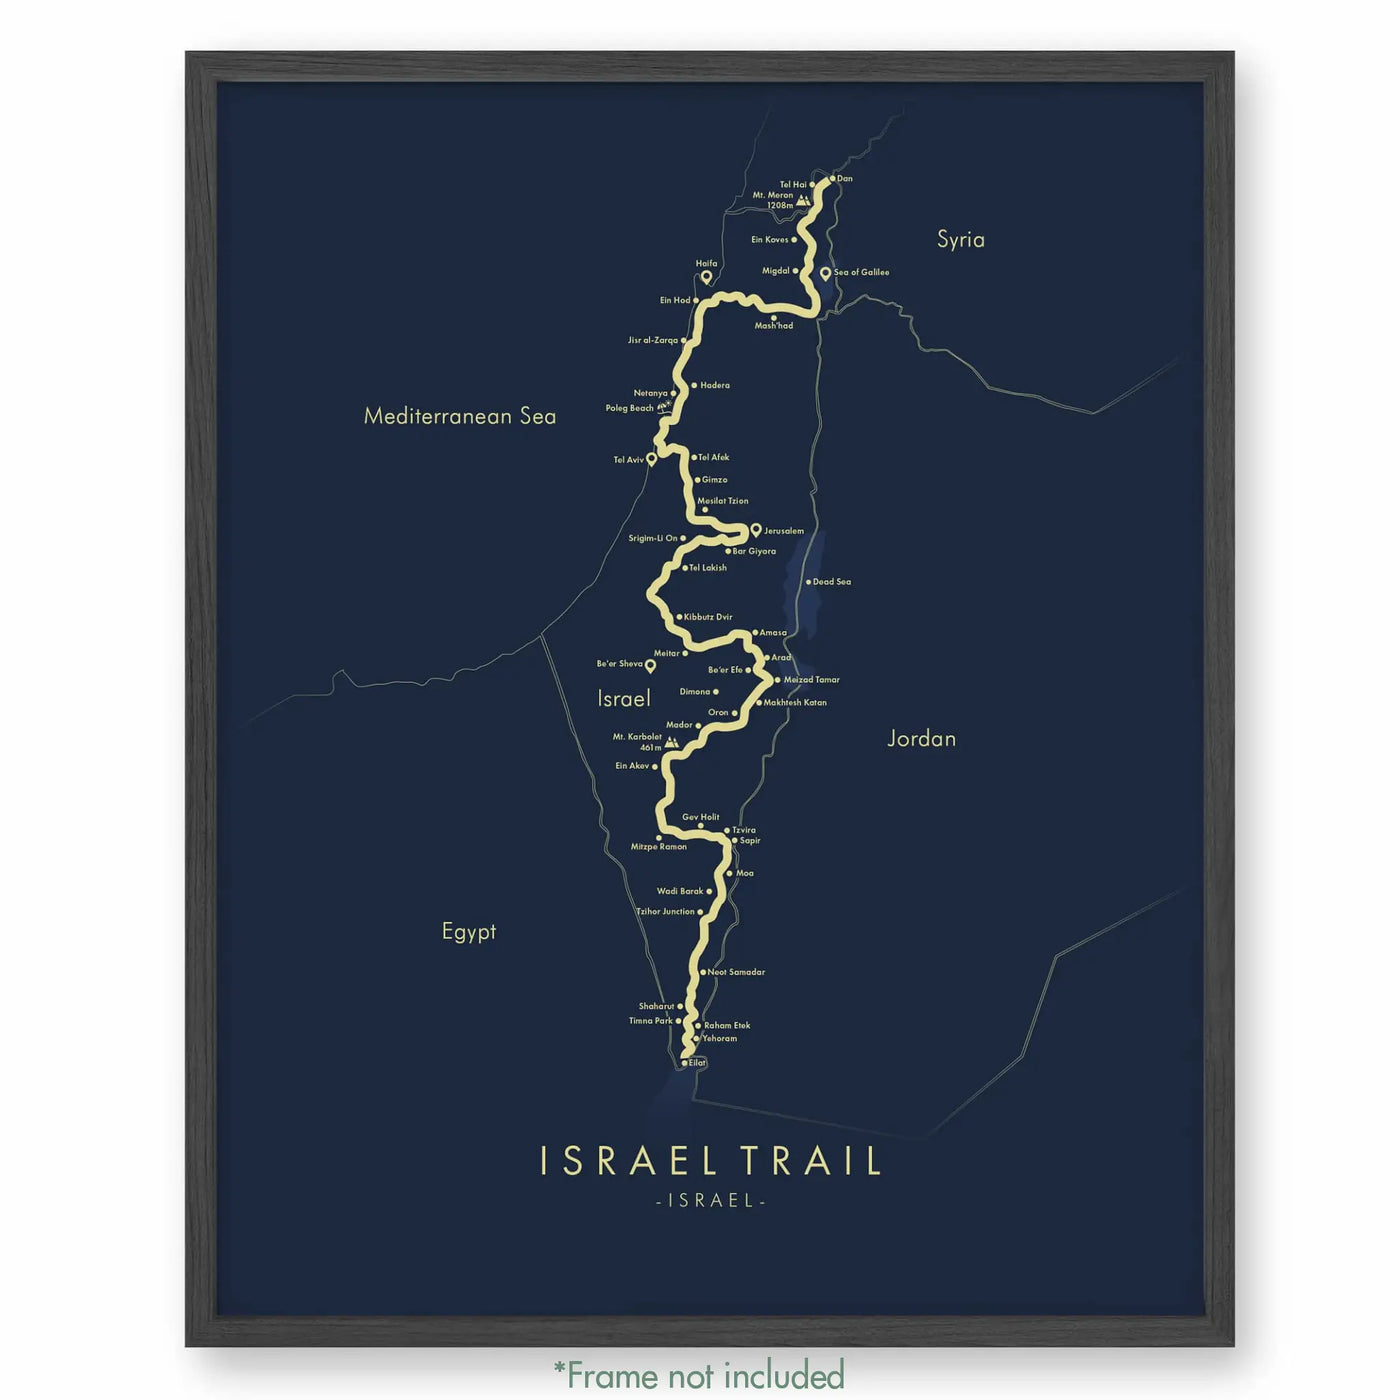 Trail Poster of Israel National Trail - Blue